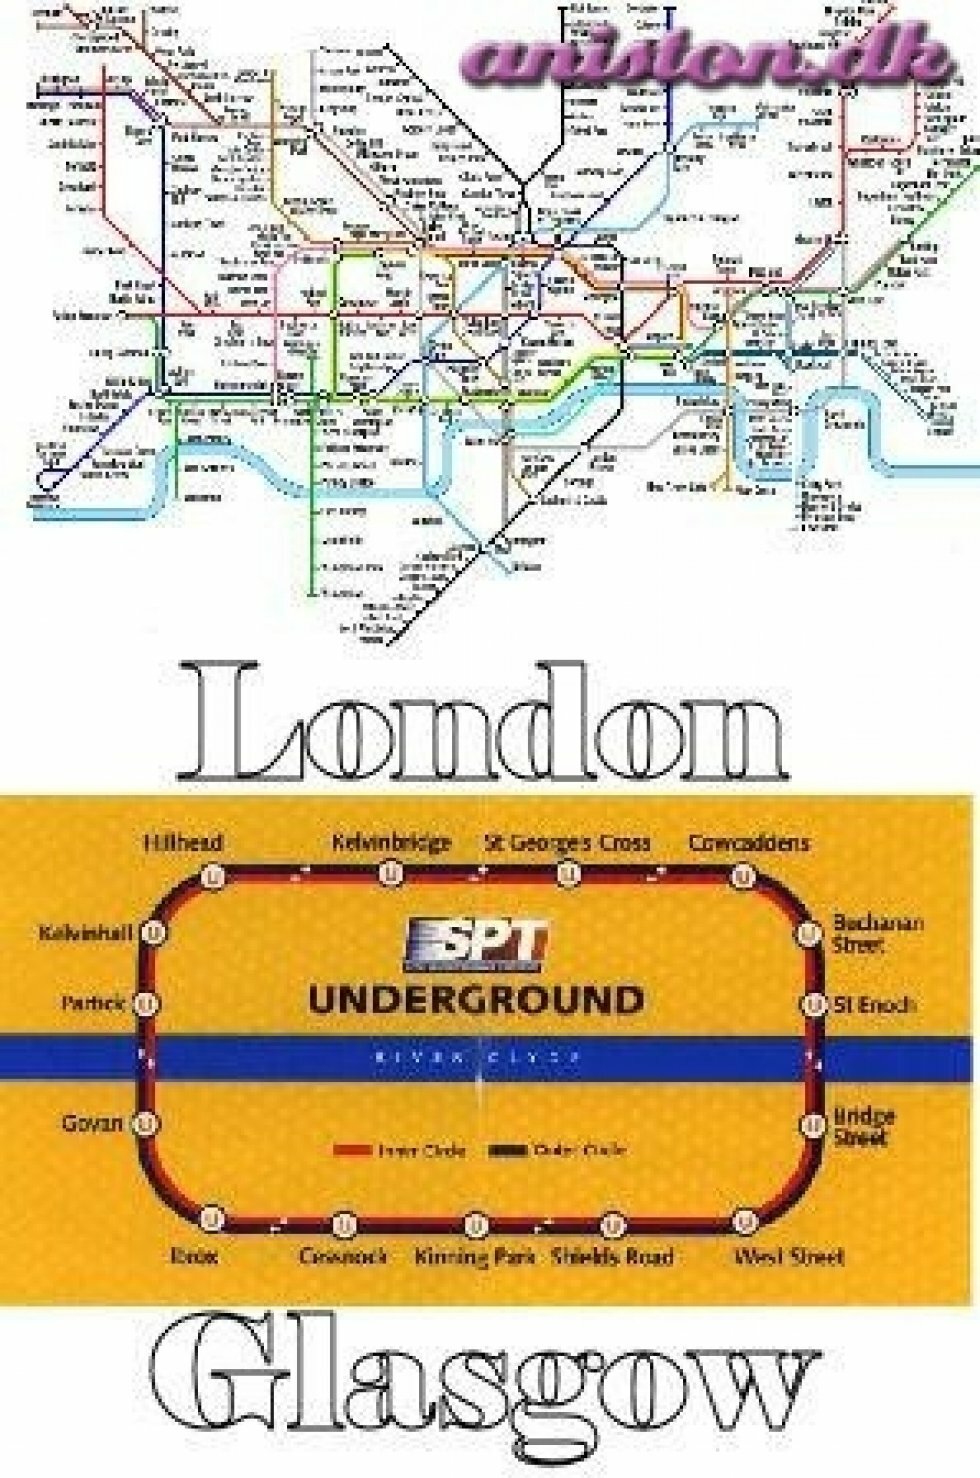 Lost in London - Part XII